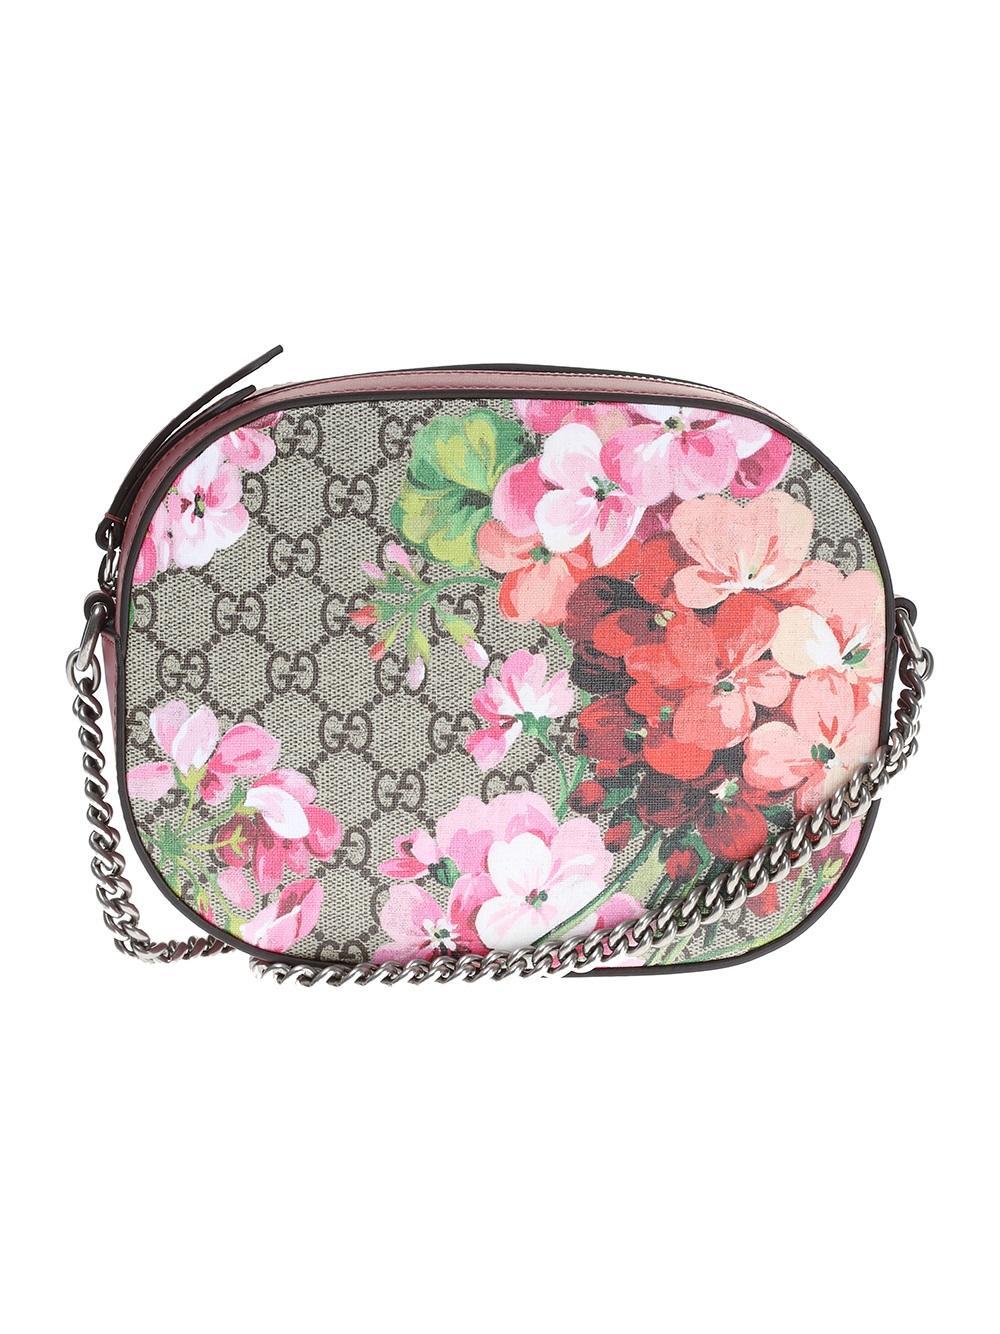 Gucci Gg Blooms Crossbody Bag in Pink